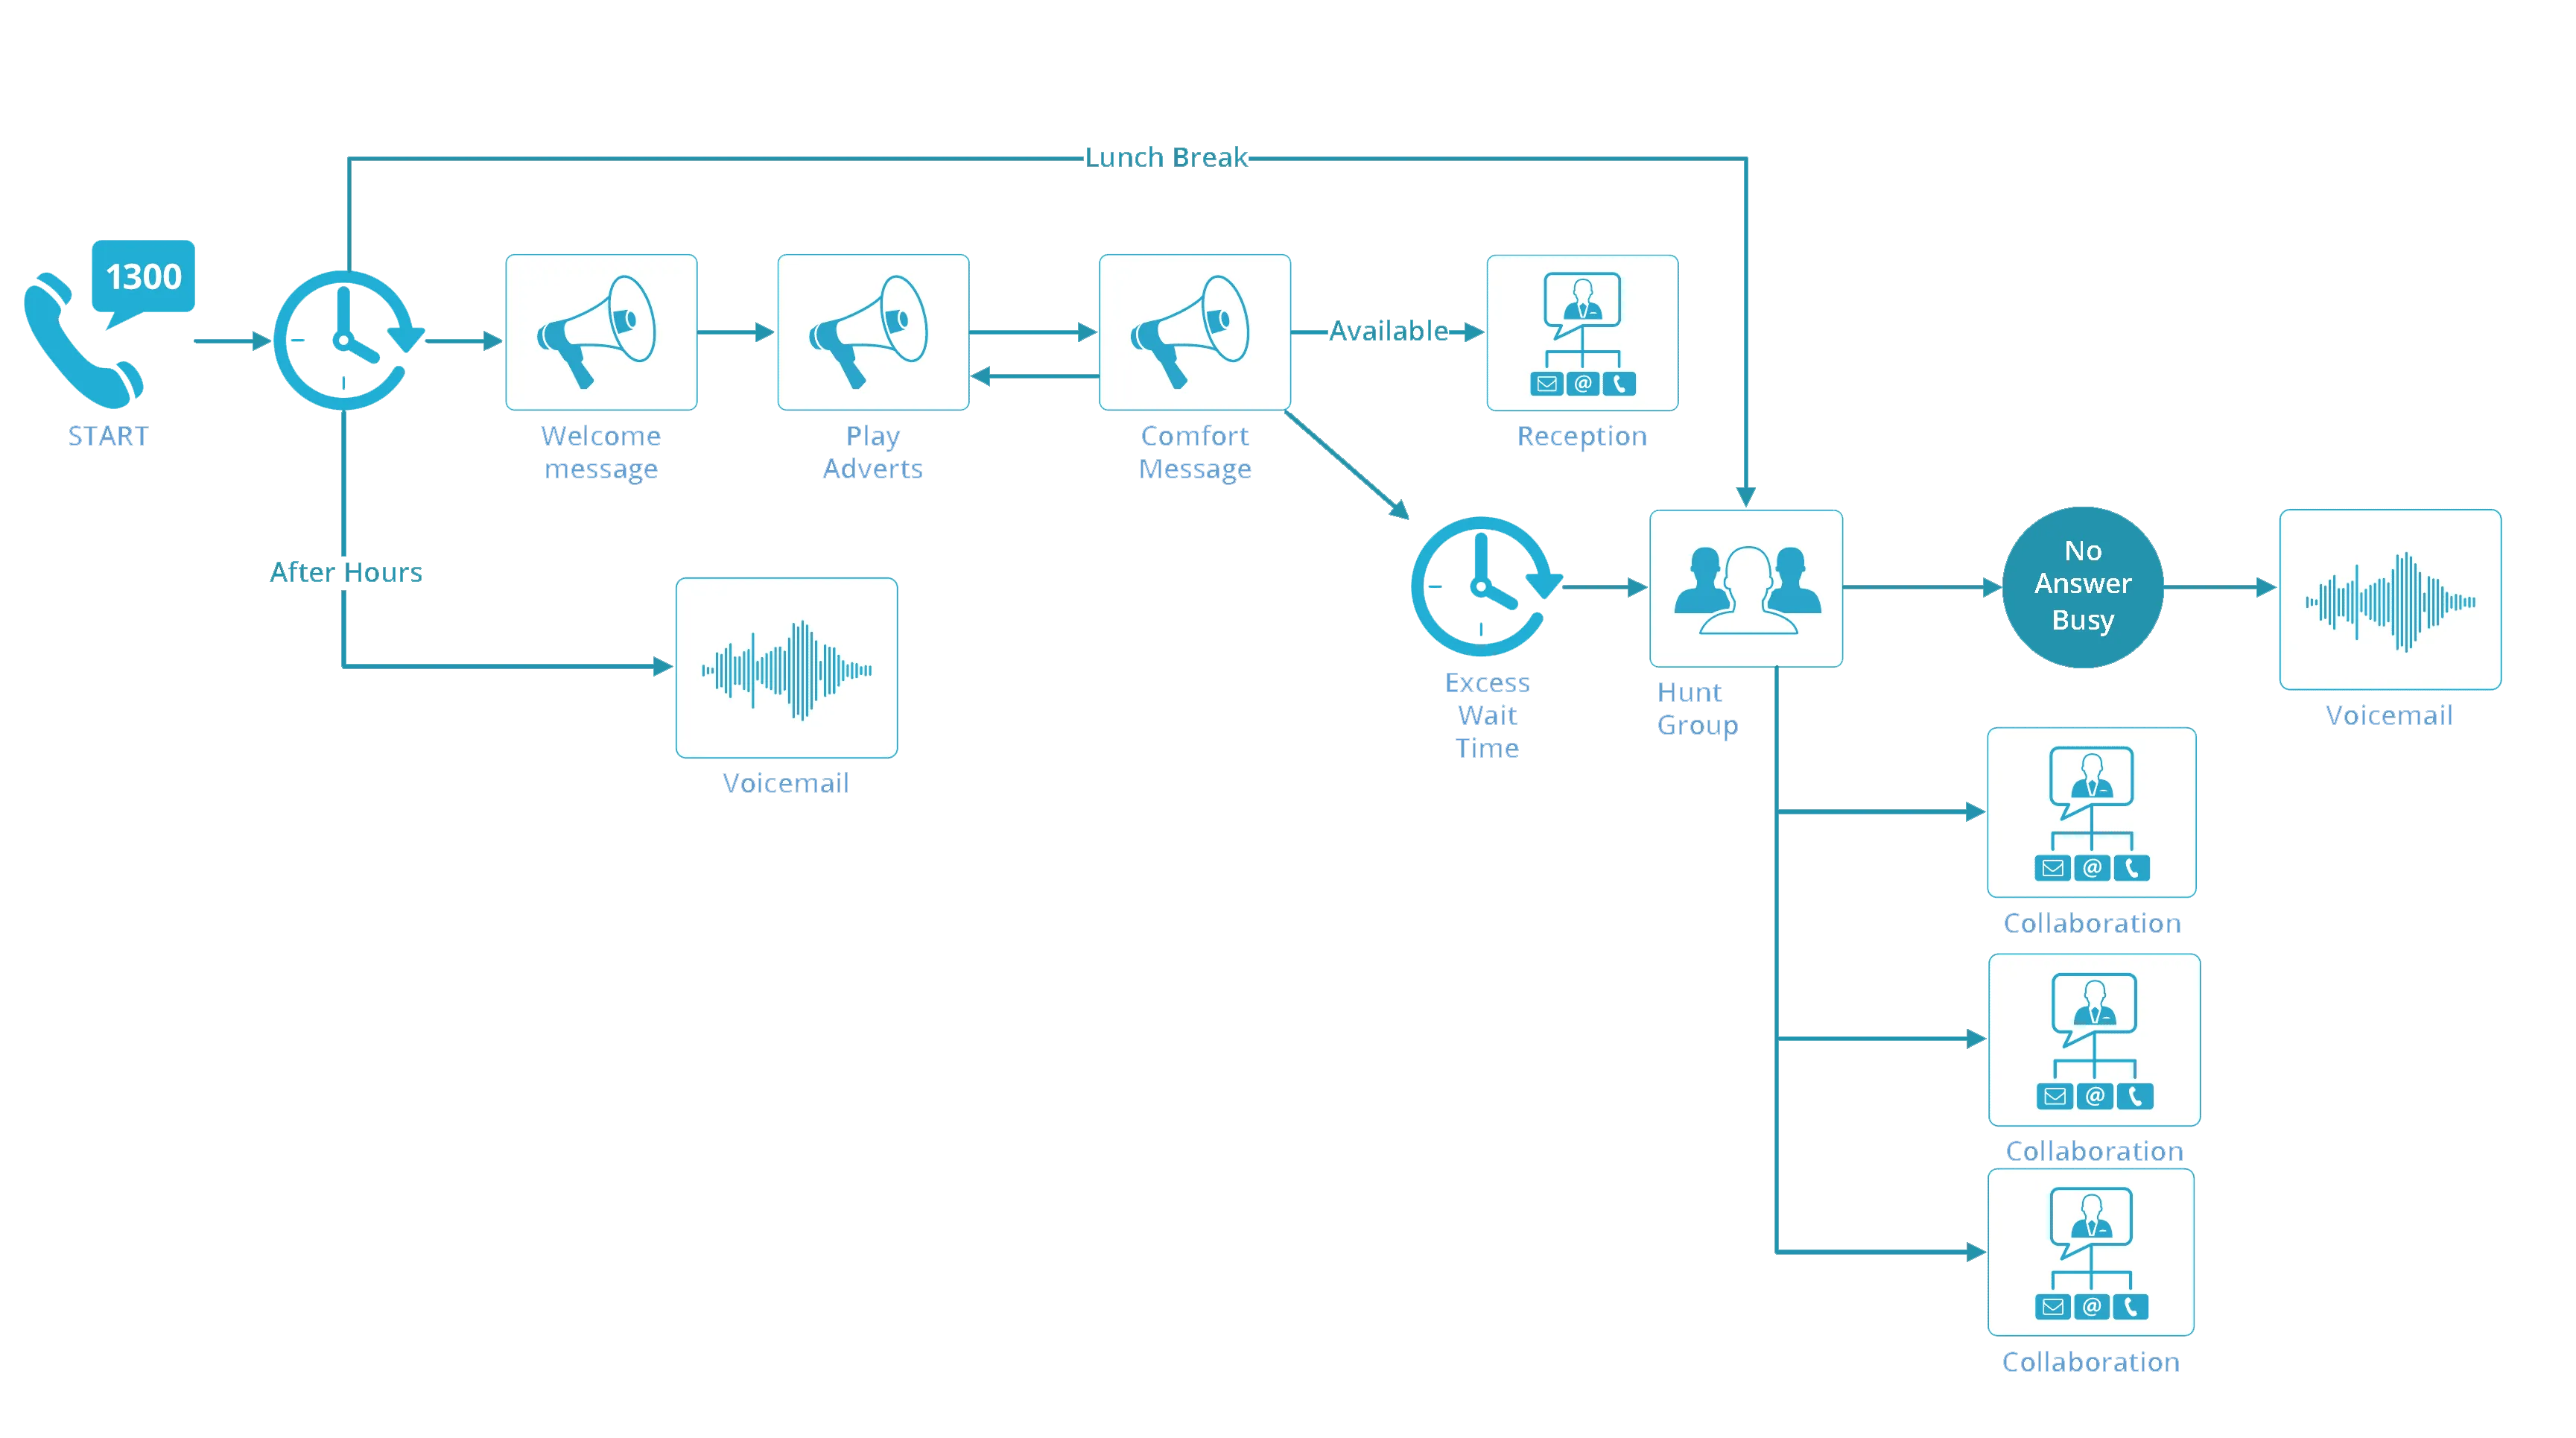 An example of a call flow design. Source: CloudVoiceSolutions